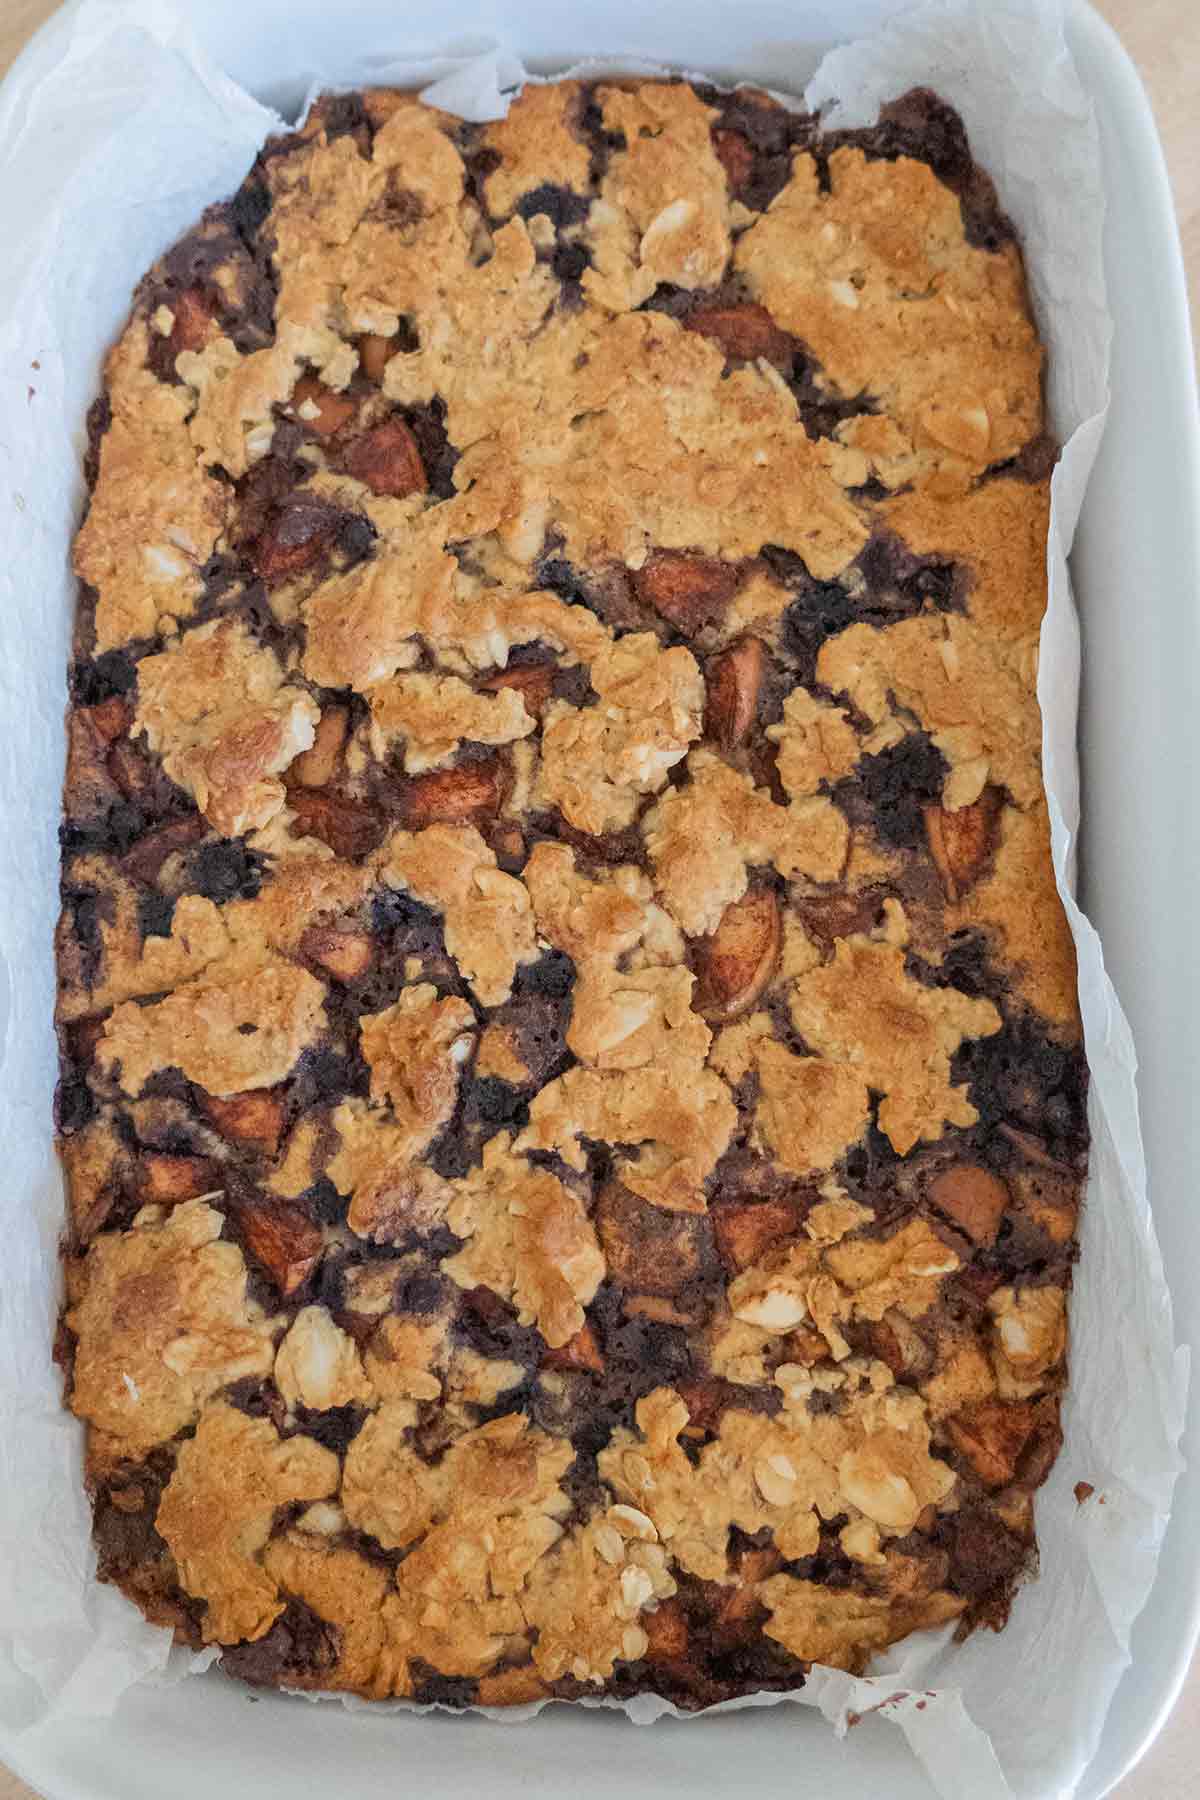 baked breakfast bars in a pan before they are sliced